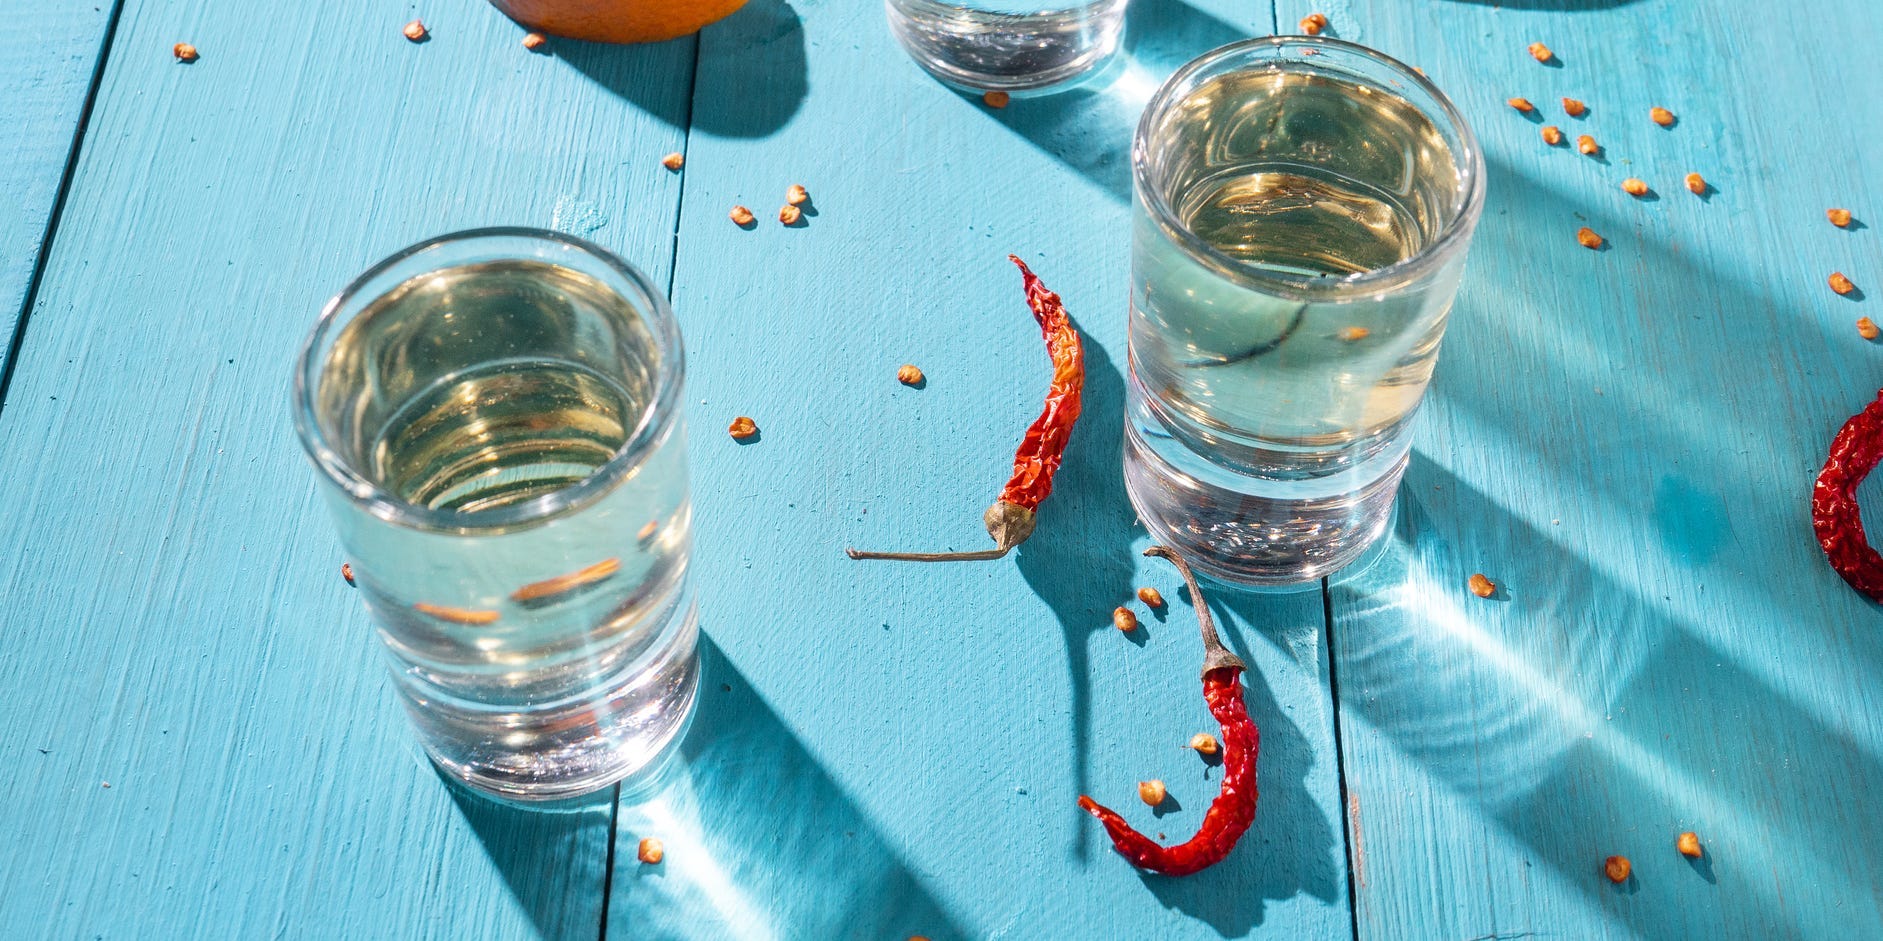 Mezcal shots with scattered orange segments and dried peppers on a bright blue wooden table